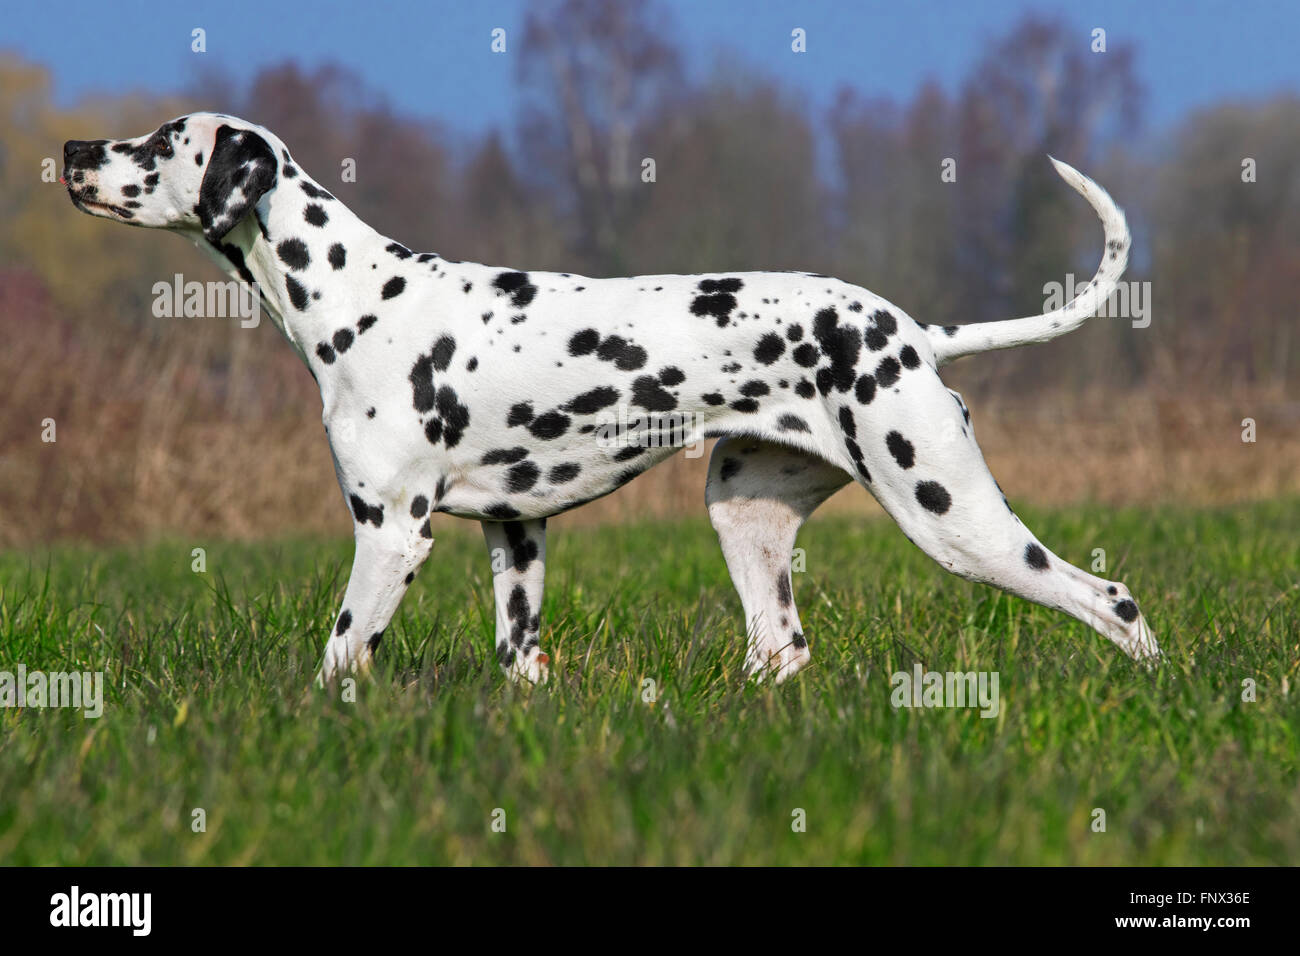 Chien dalmatien / transport / spotted coach dog in field Banque D'Images